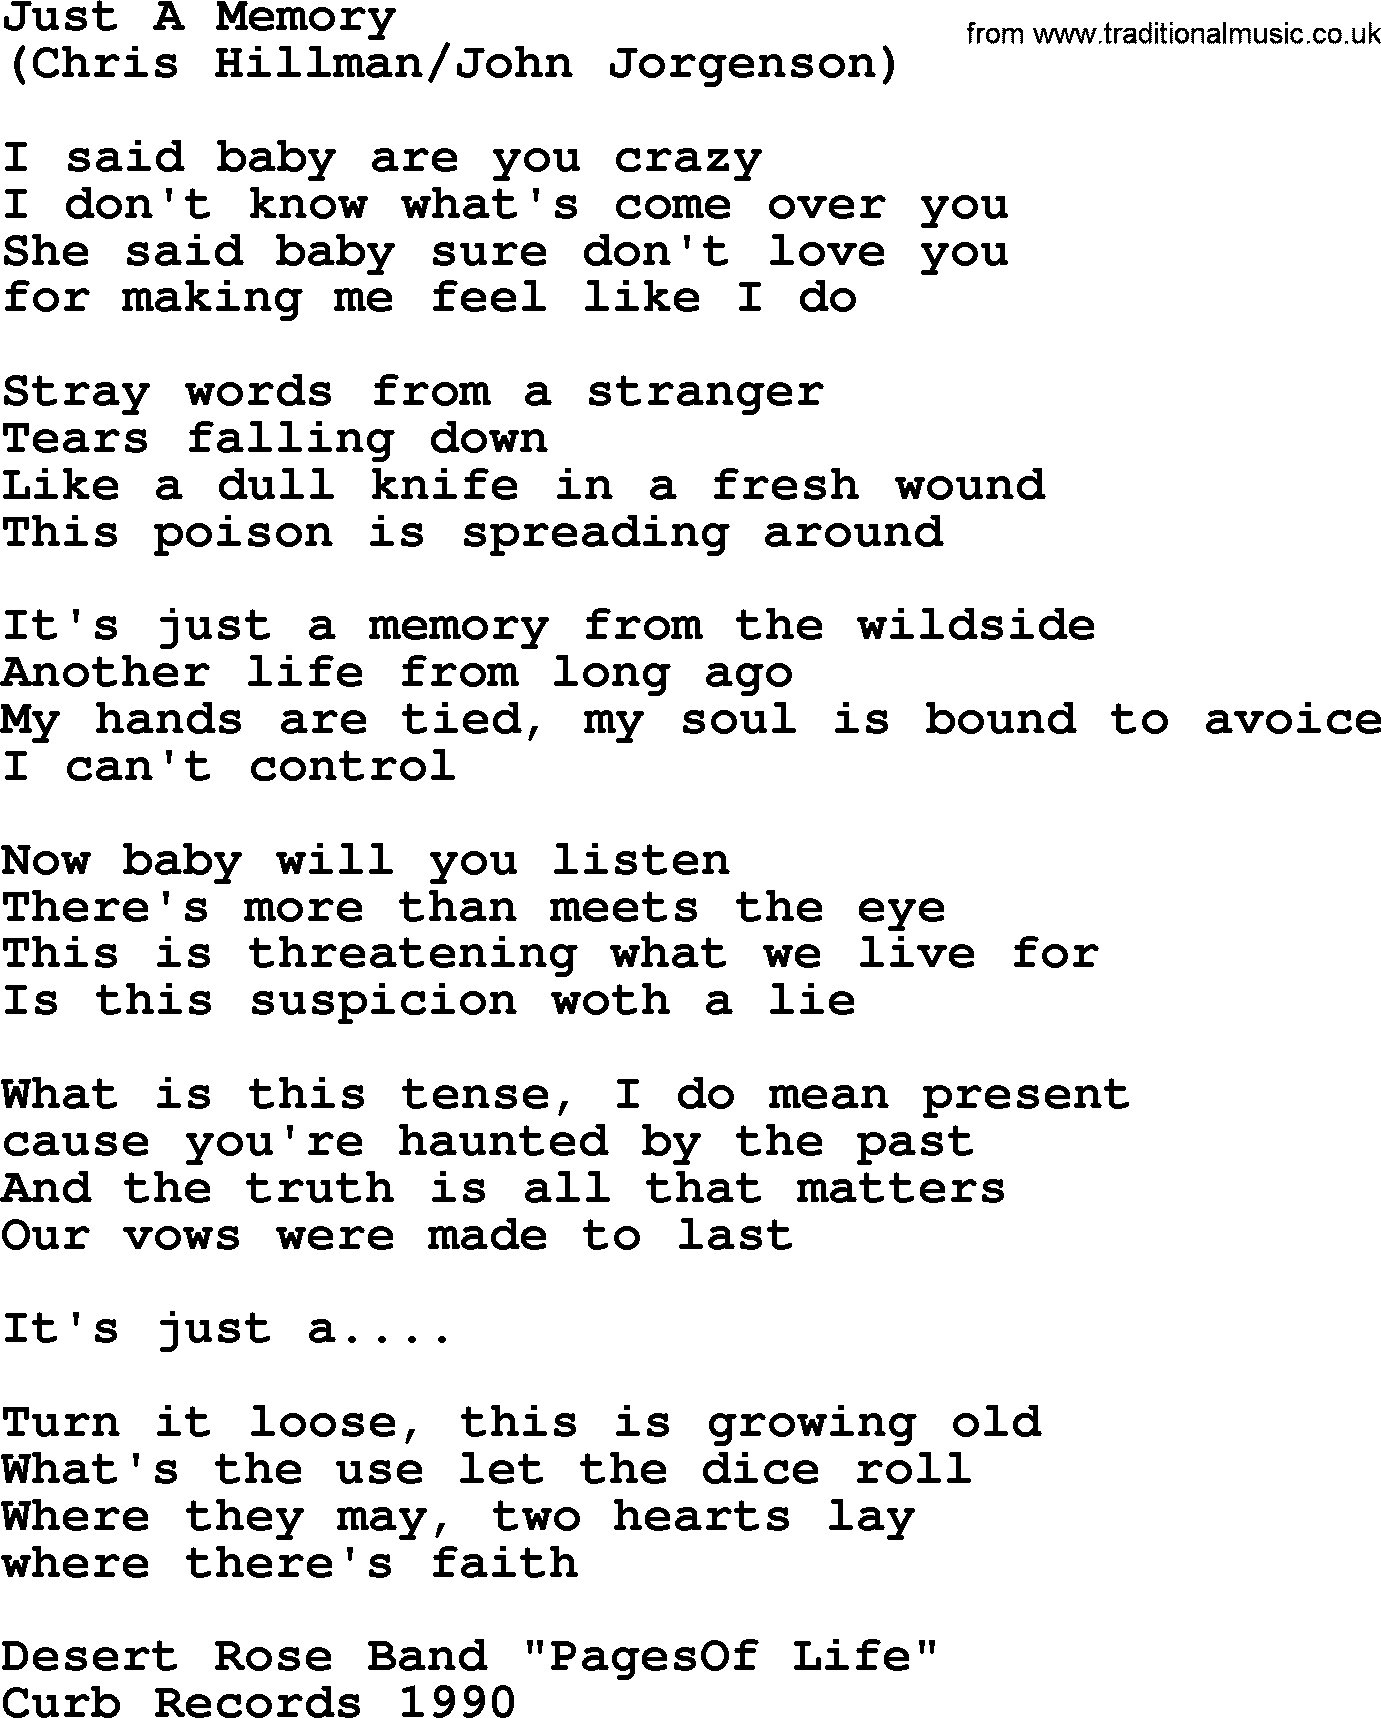 The Byrds song Just A Memory, lyrics